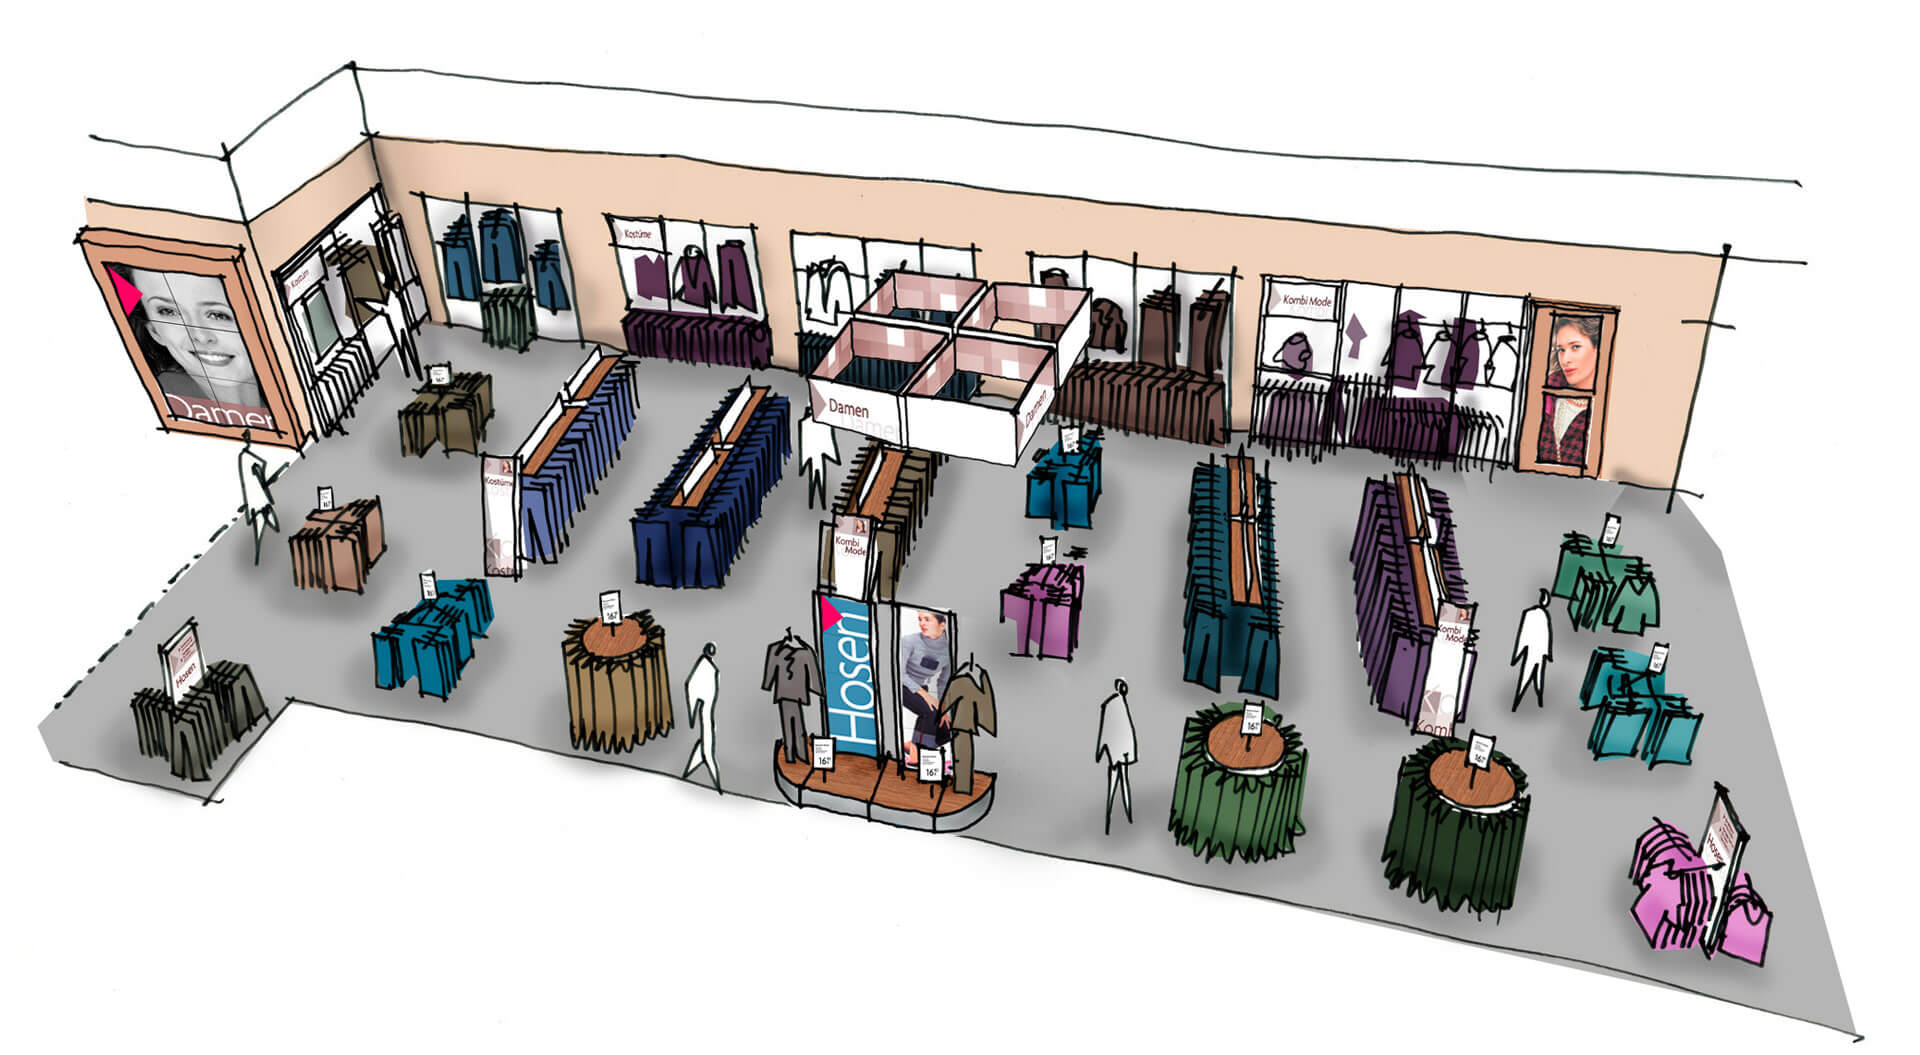  Adler Fashion Store Germany sketch of retail store interior design womens wear jeans department